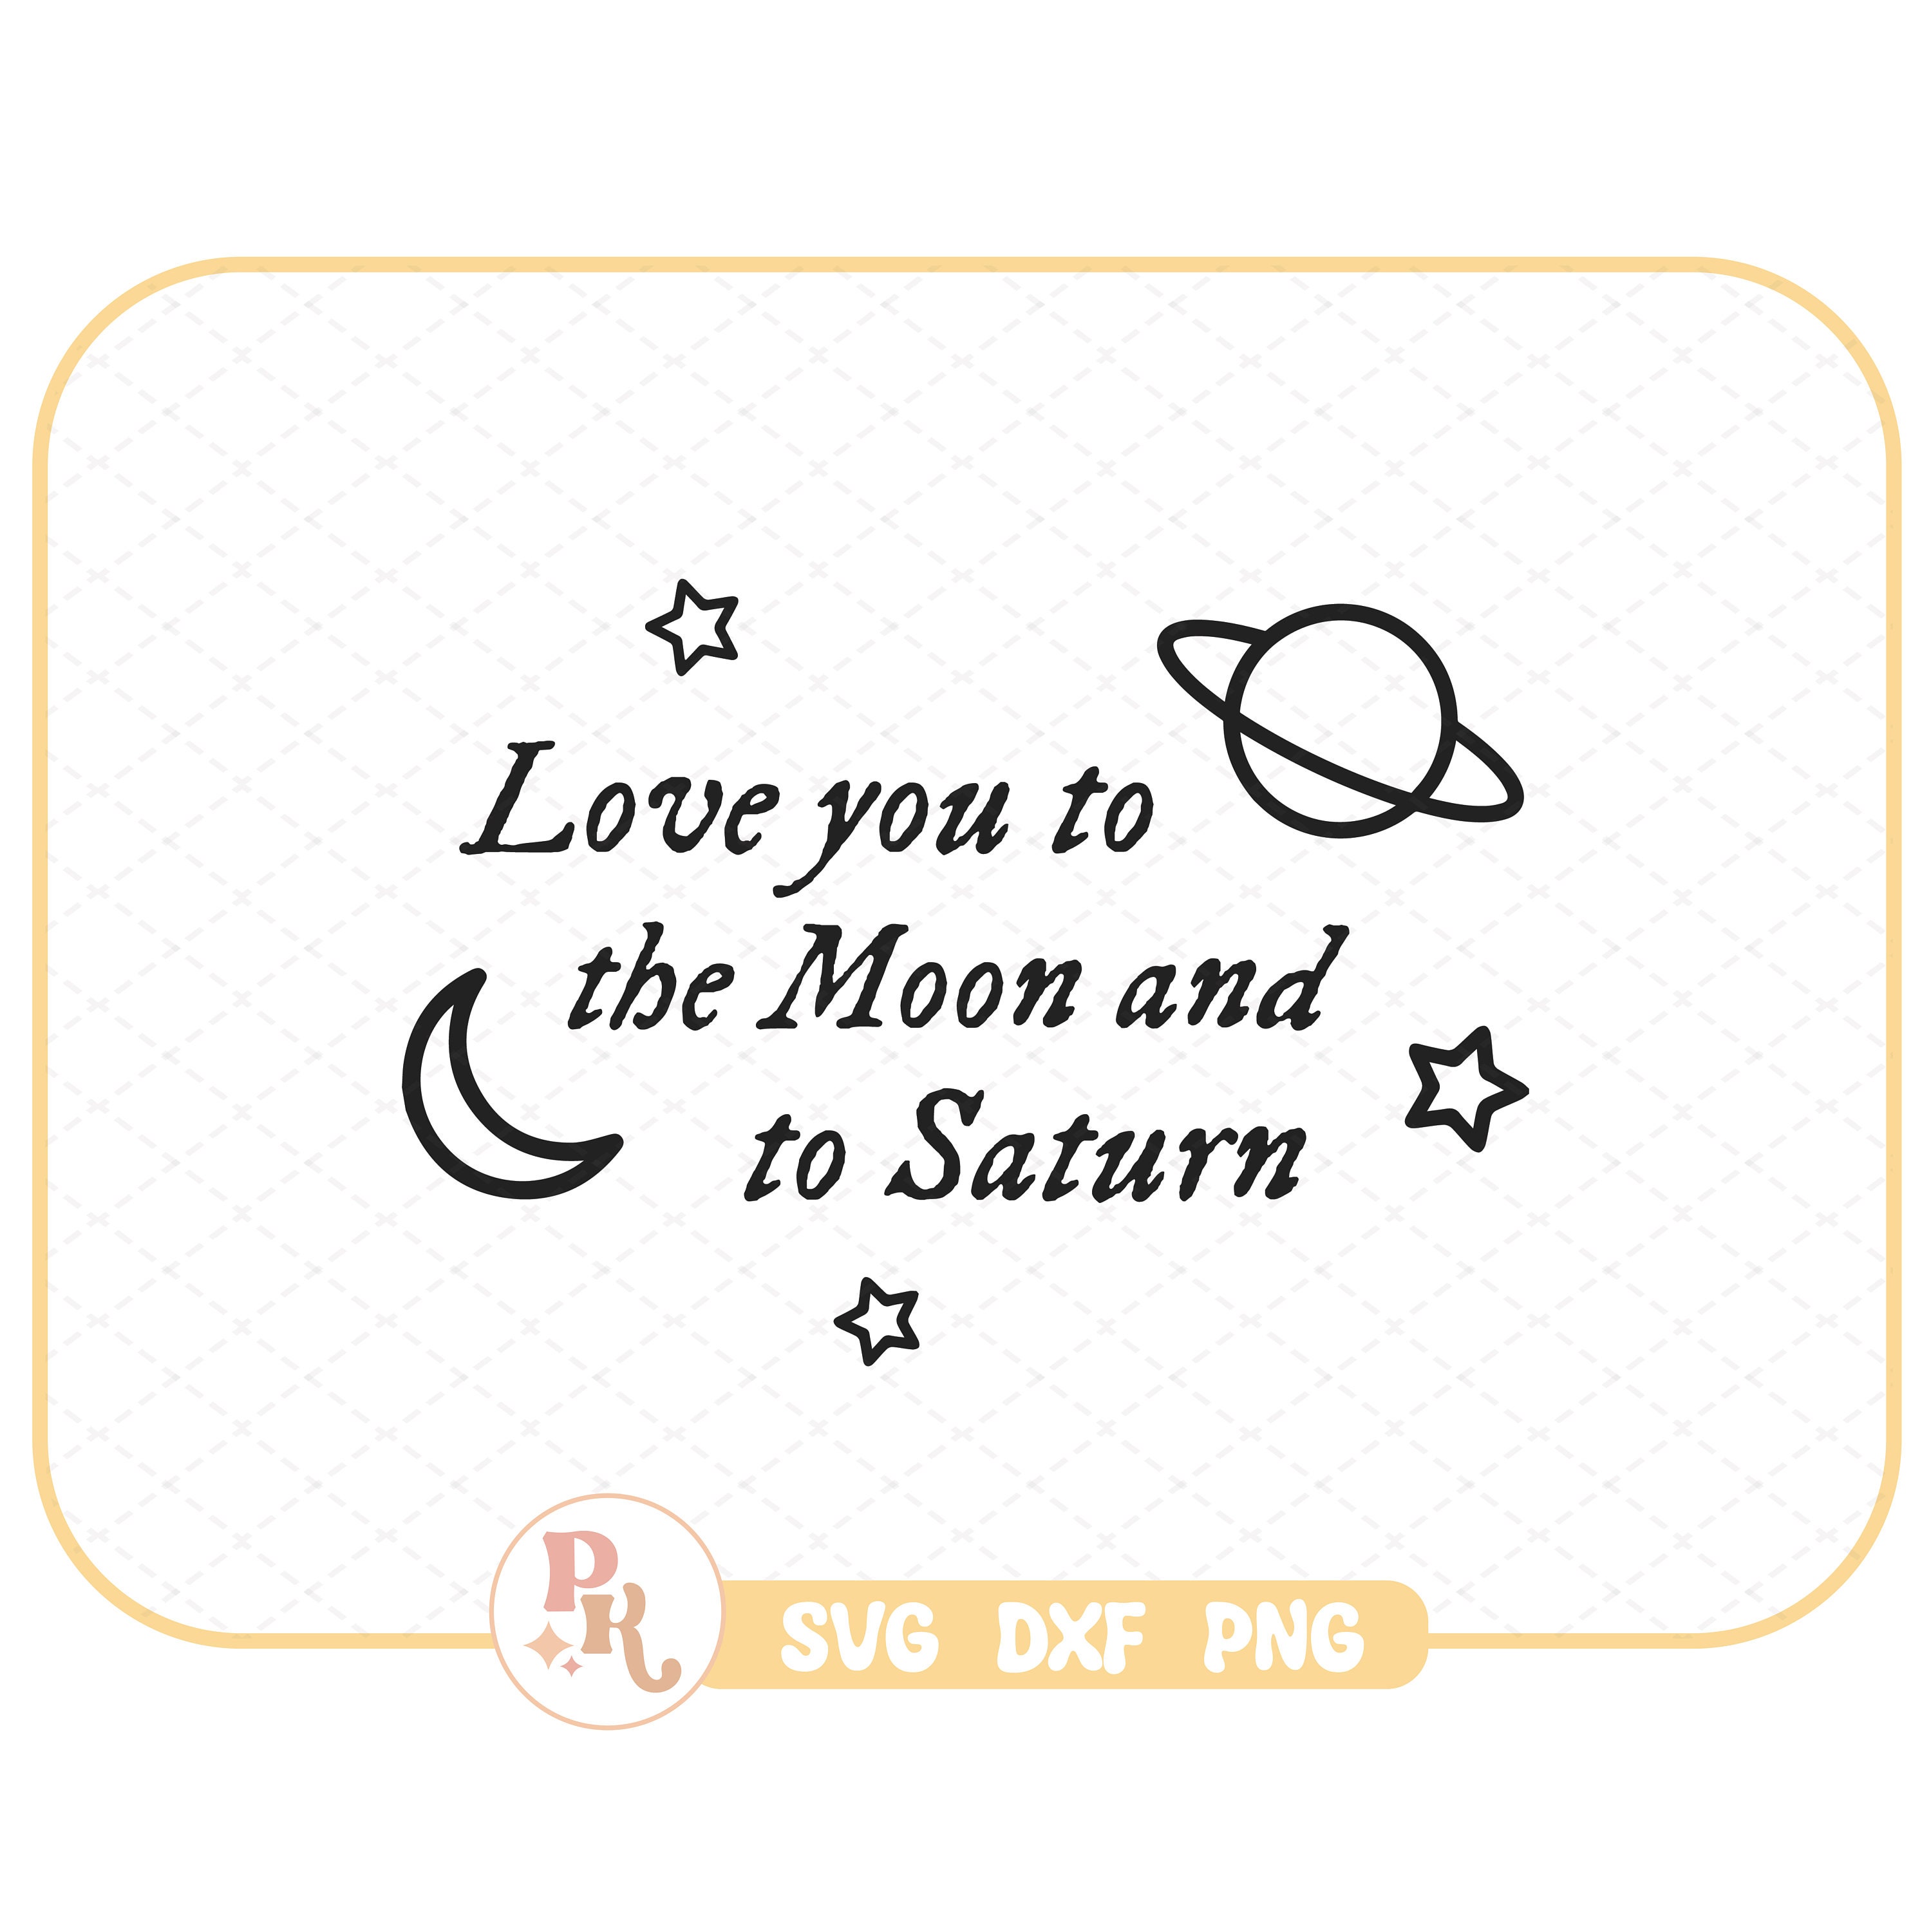 Love You to the Moon and to Saturn Folklore Taylor Swift Greeting Card for  Sale by natfaithh